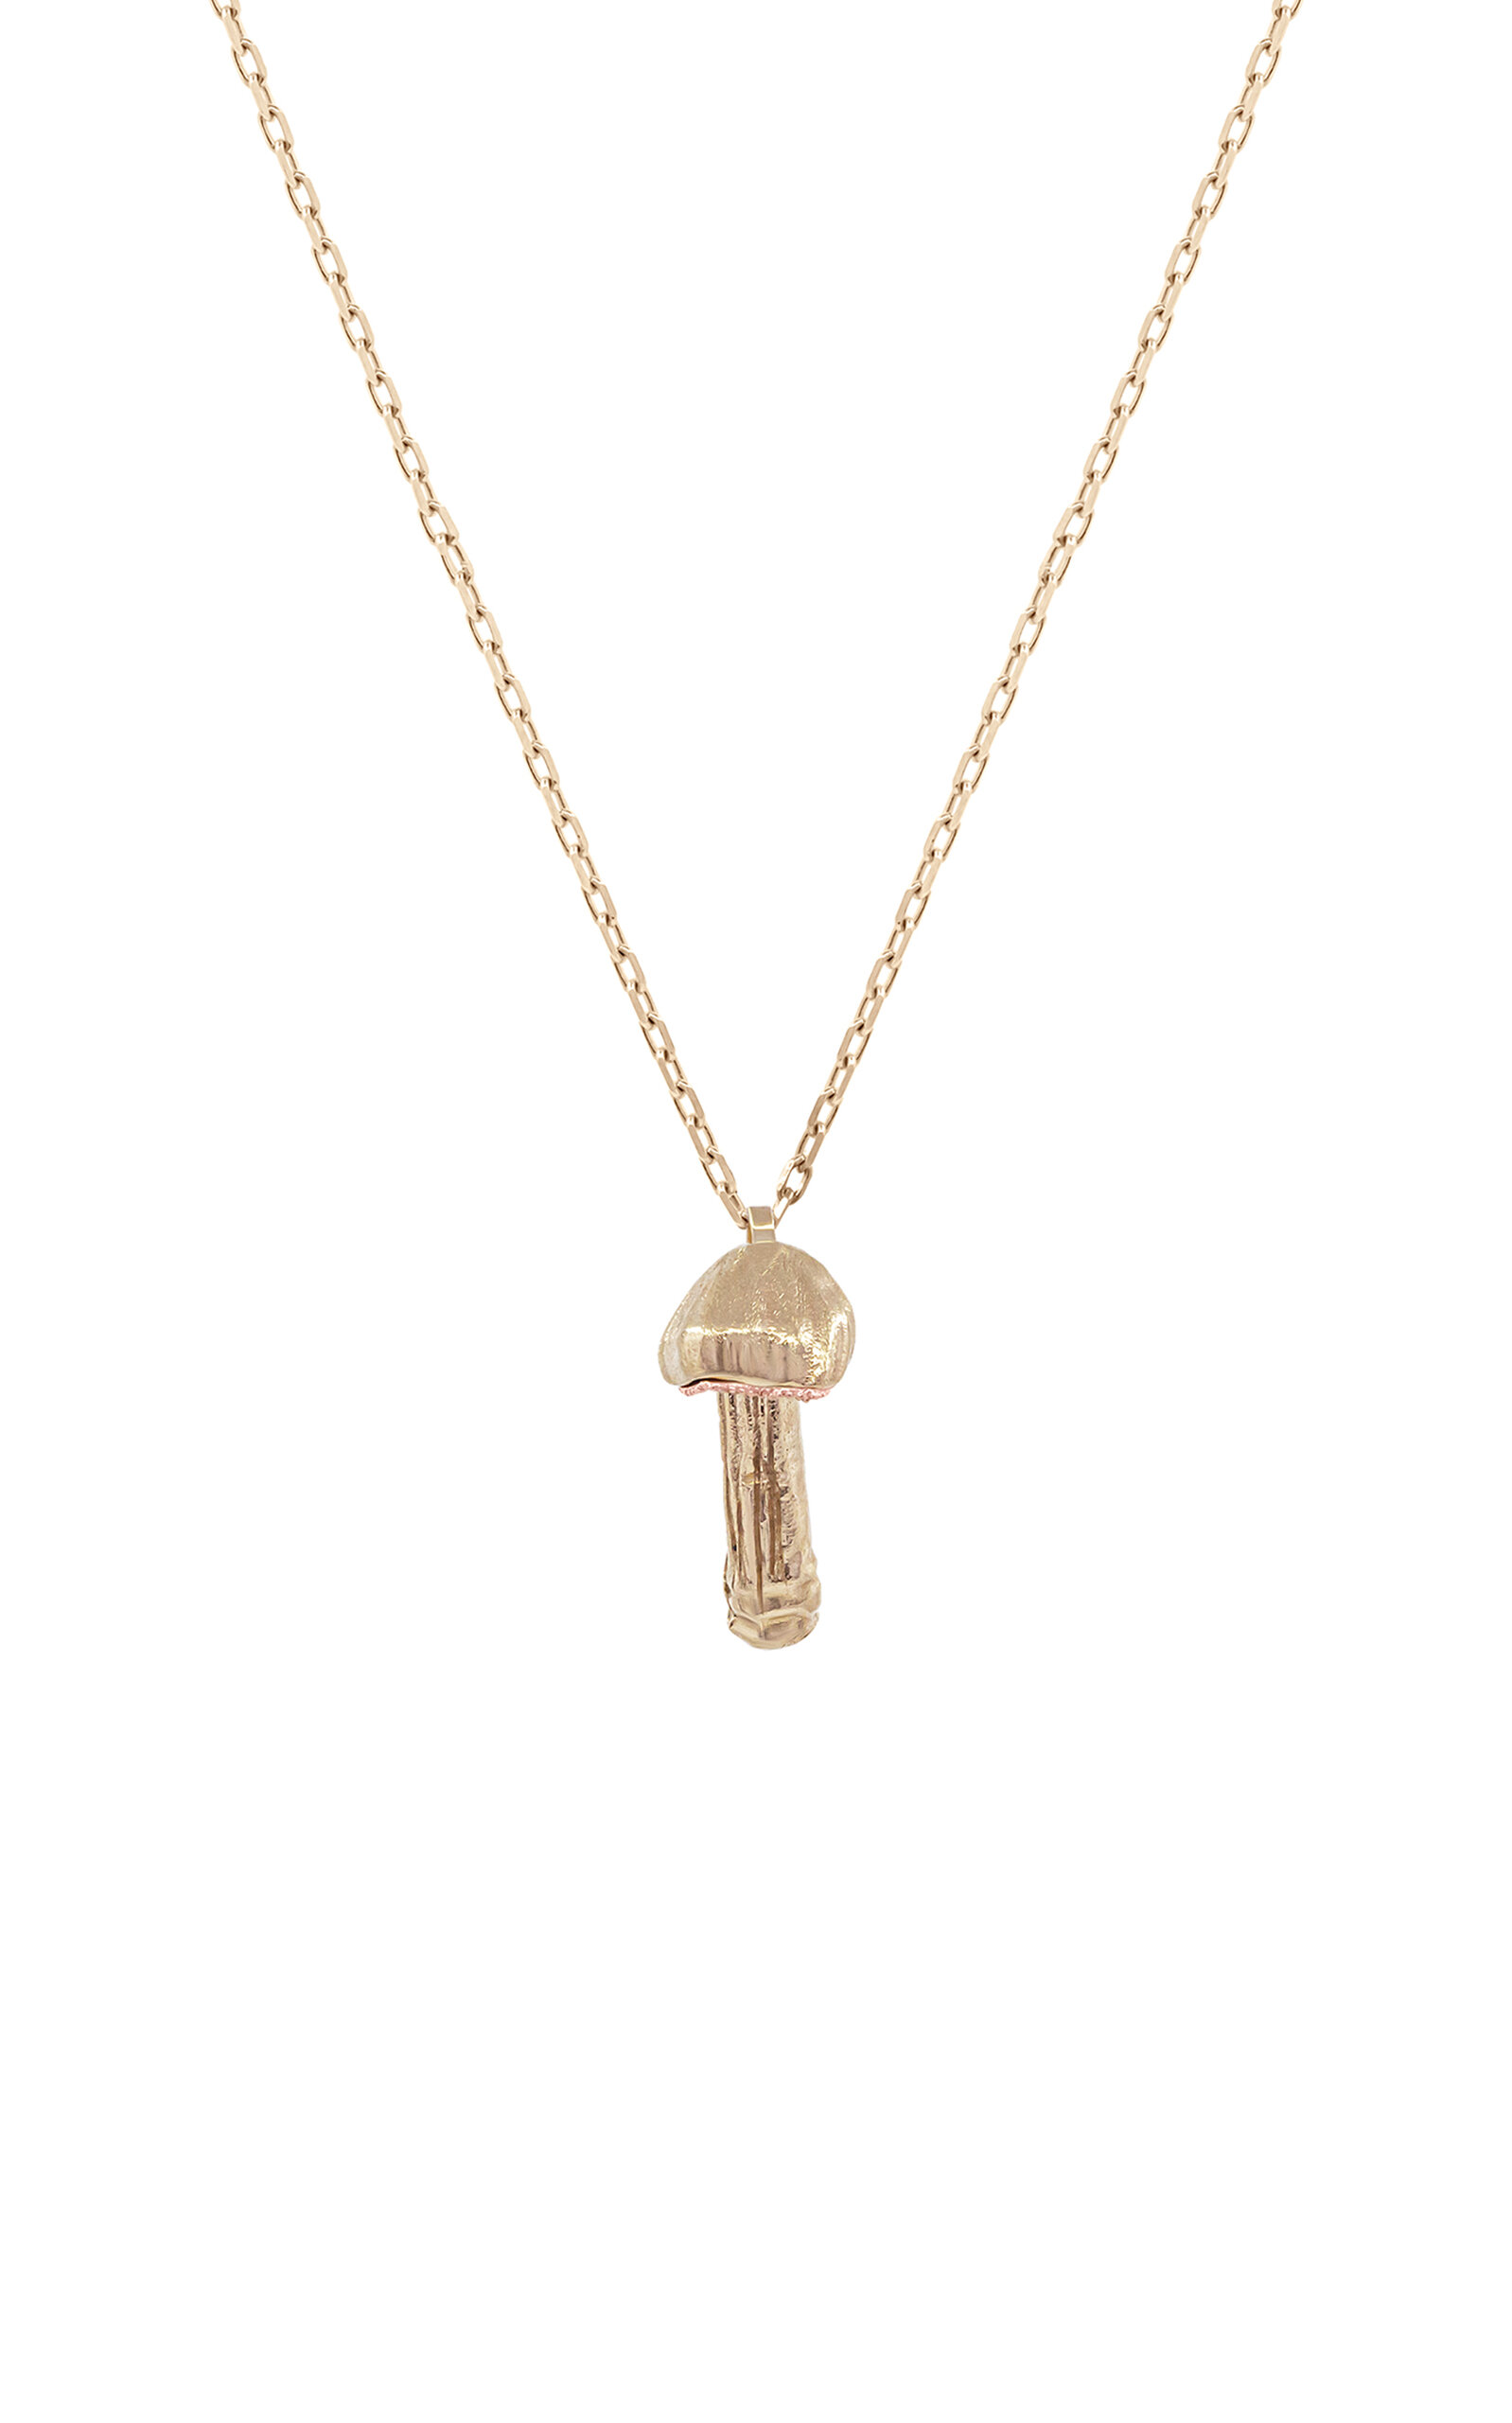 Fungi Conica 14K Yellow and Rose Gold Necklace